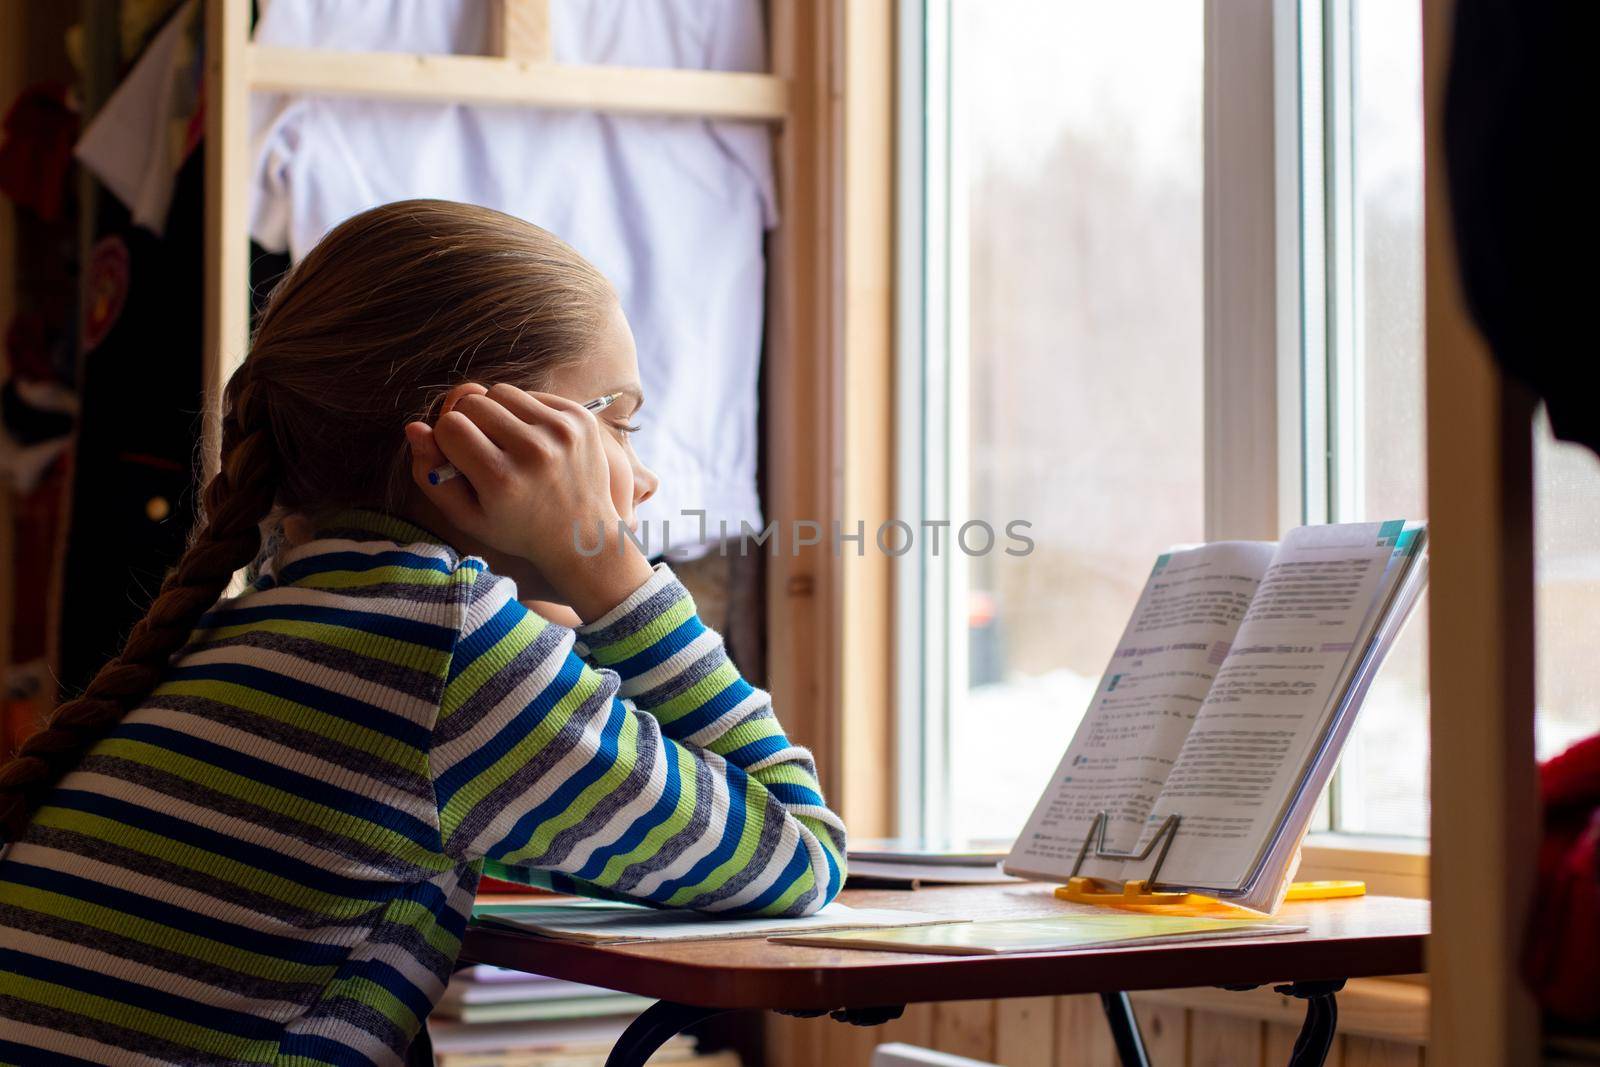 The schoolgirl carefully reads the task in the textbook while sitting at the table by the window at home